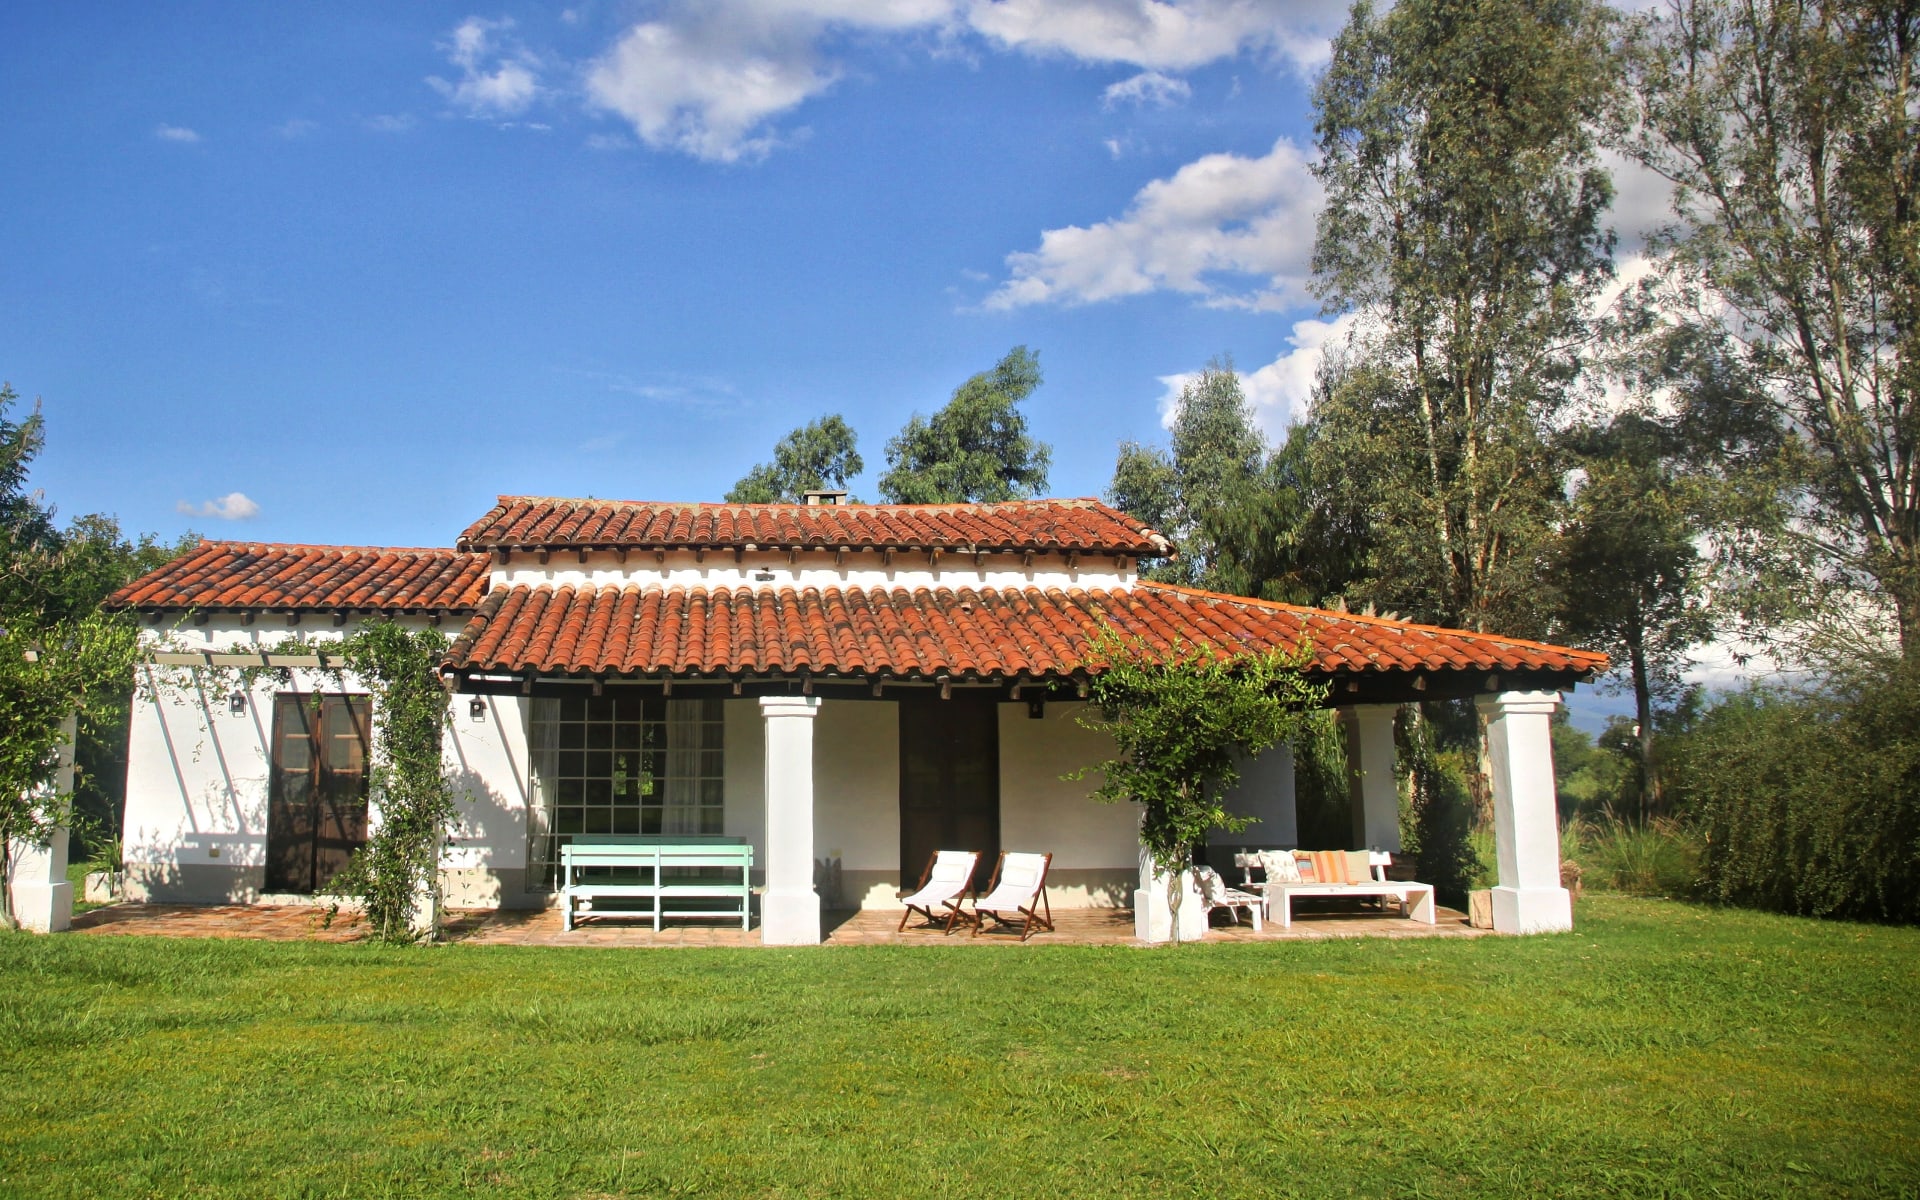 Finca Valentia in Argentina is a romantic-looking, white-washed building draped with plants and featuring red-tile roofs. 